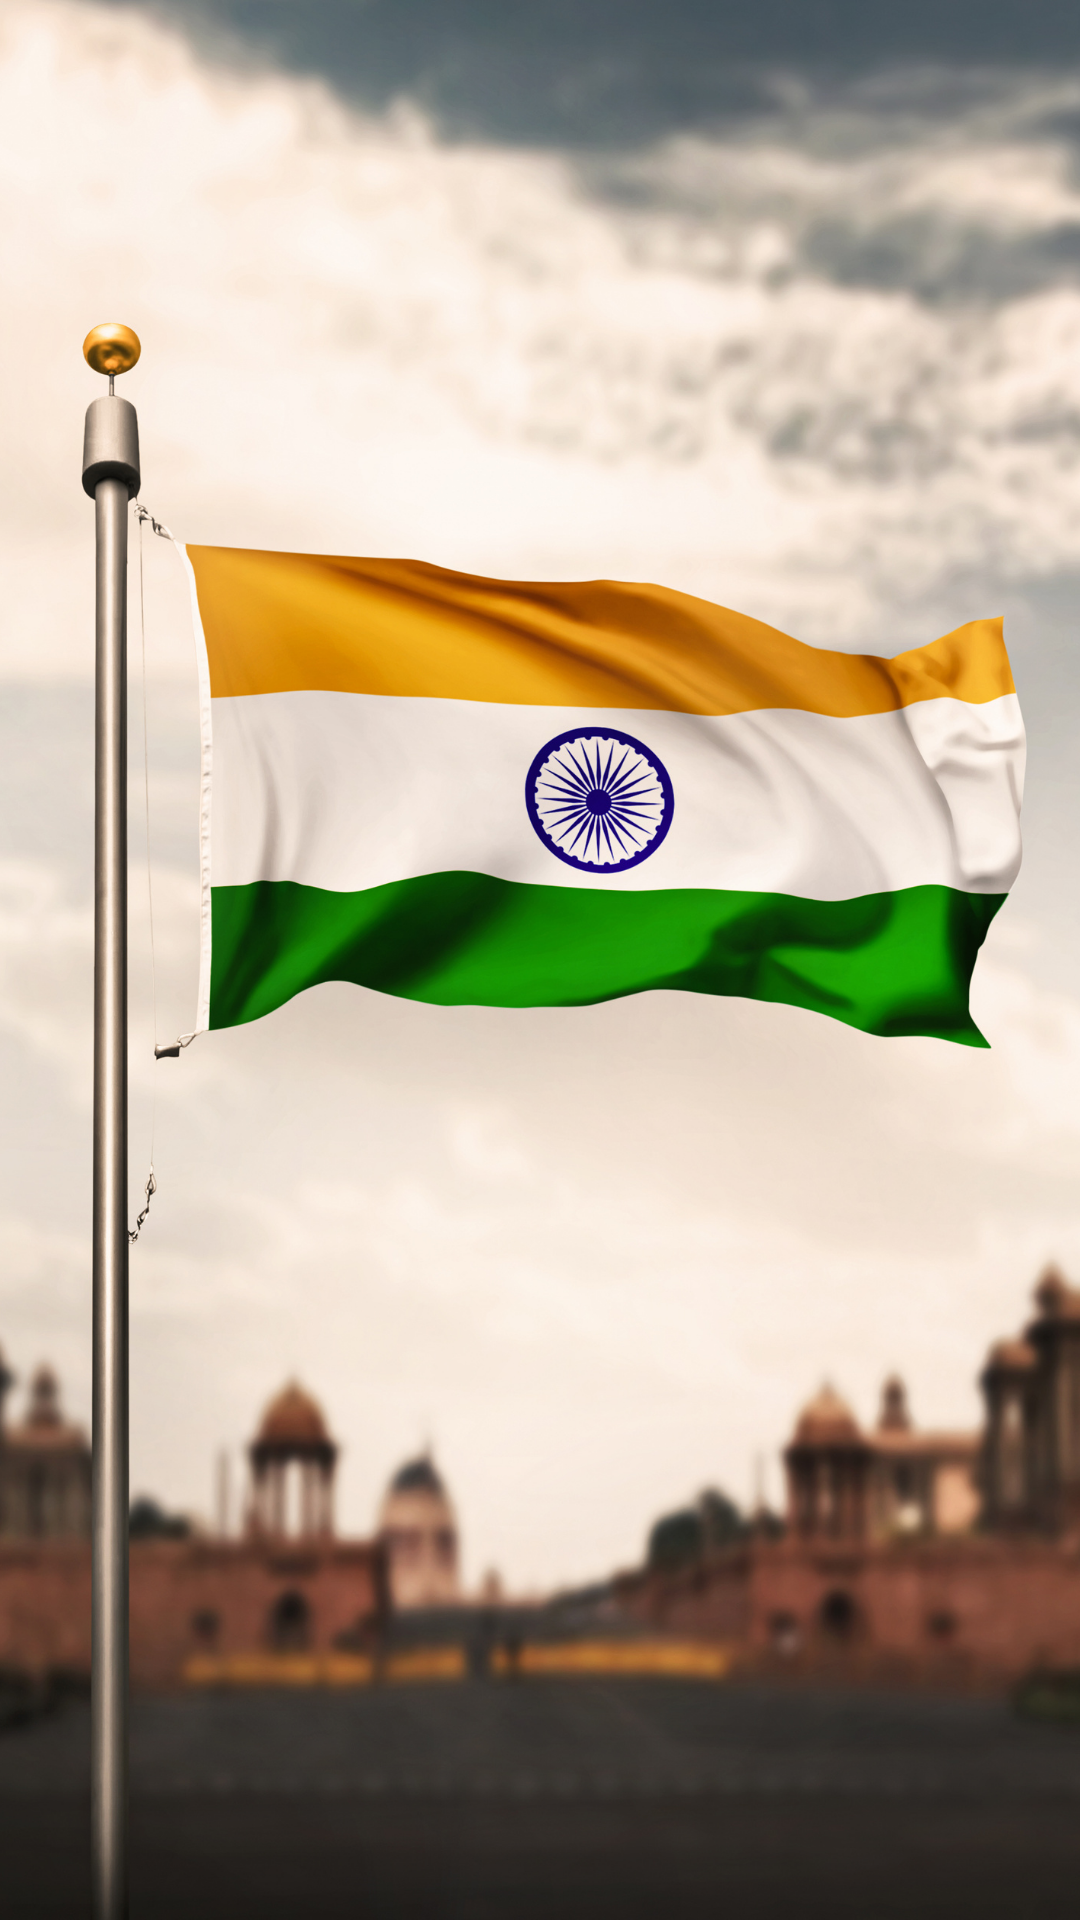 proud to be an indian wallpapers hd